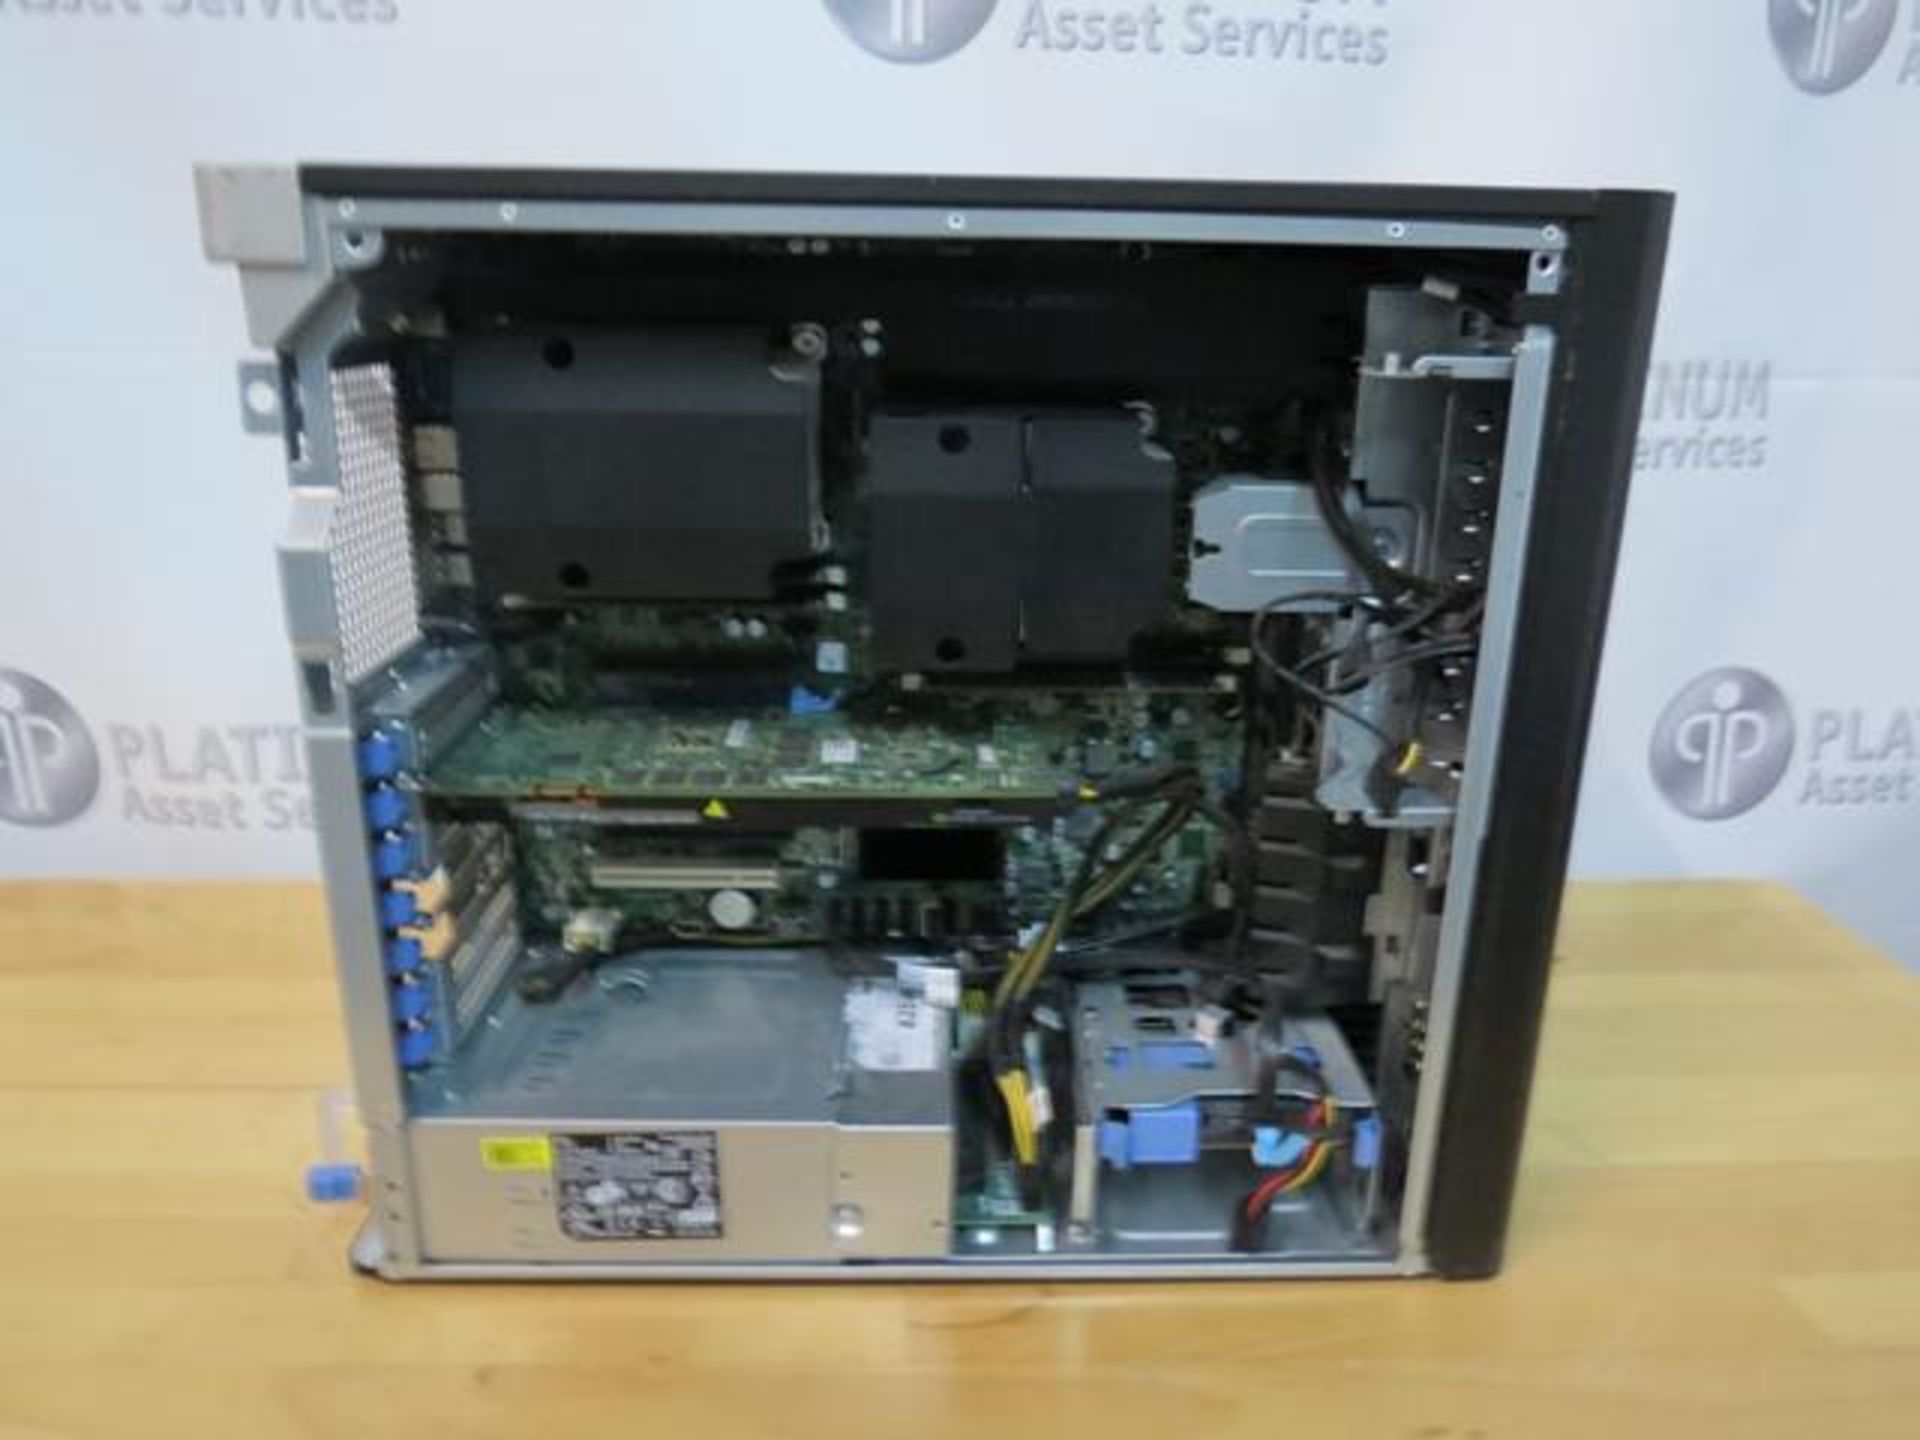 DELL, PRECISION T5600, DESKTOP WORKSTATION (UNIT DOES NOT BOOT UP) (TAG#116) - Image 4 of 5